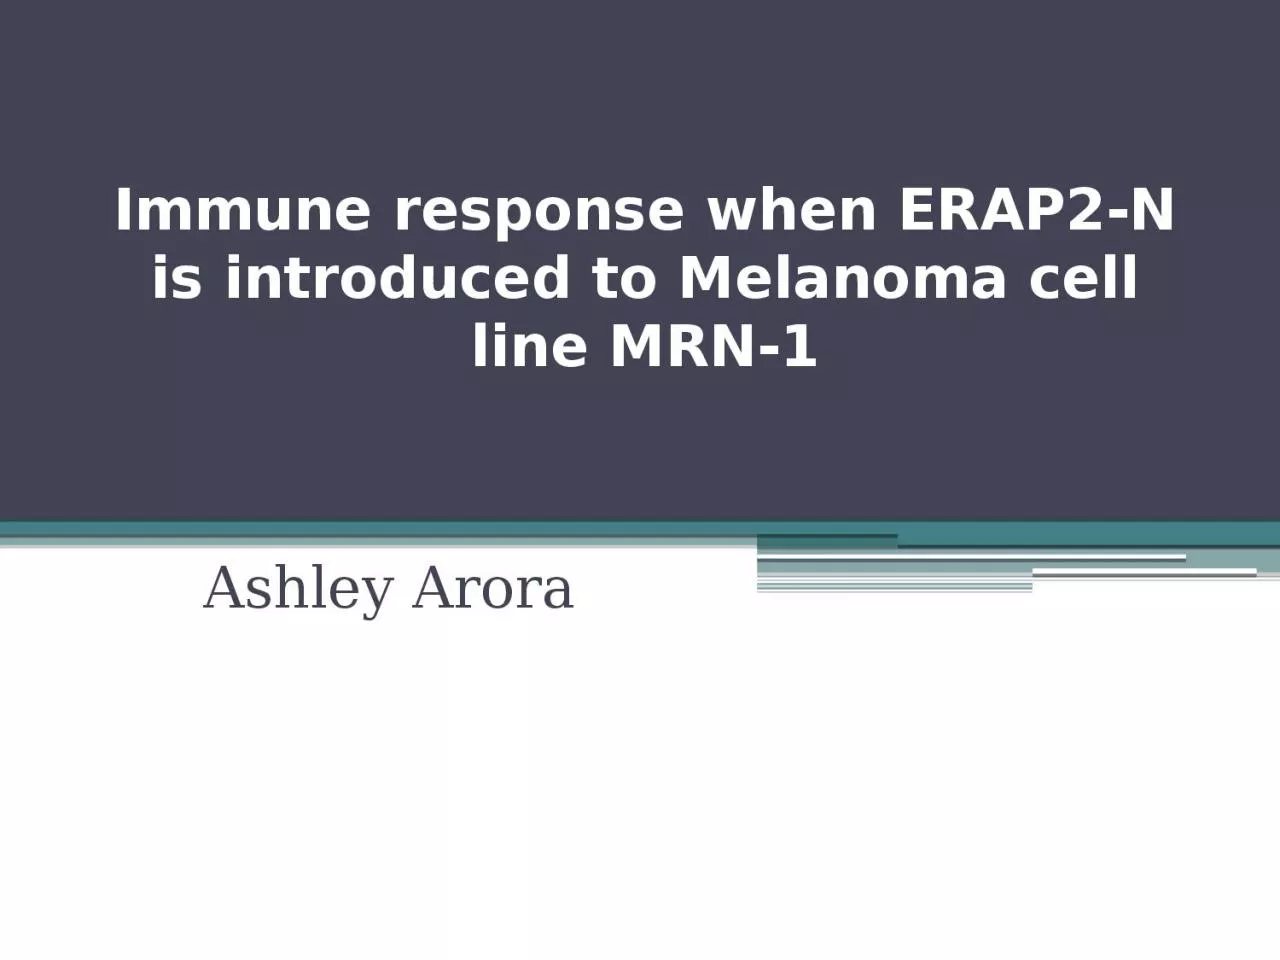 Immune response when ERAP2-N is introduced to Melanoma cell line MRN-1